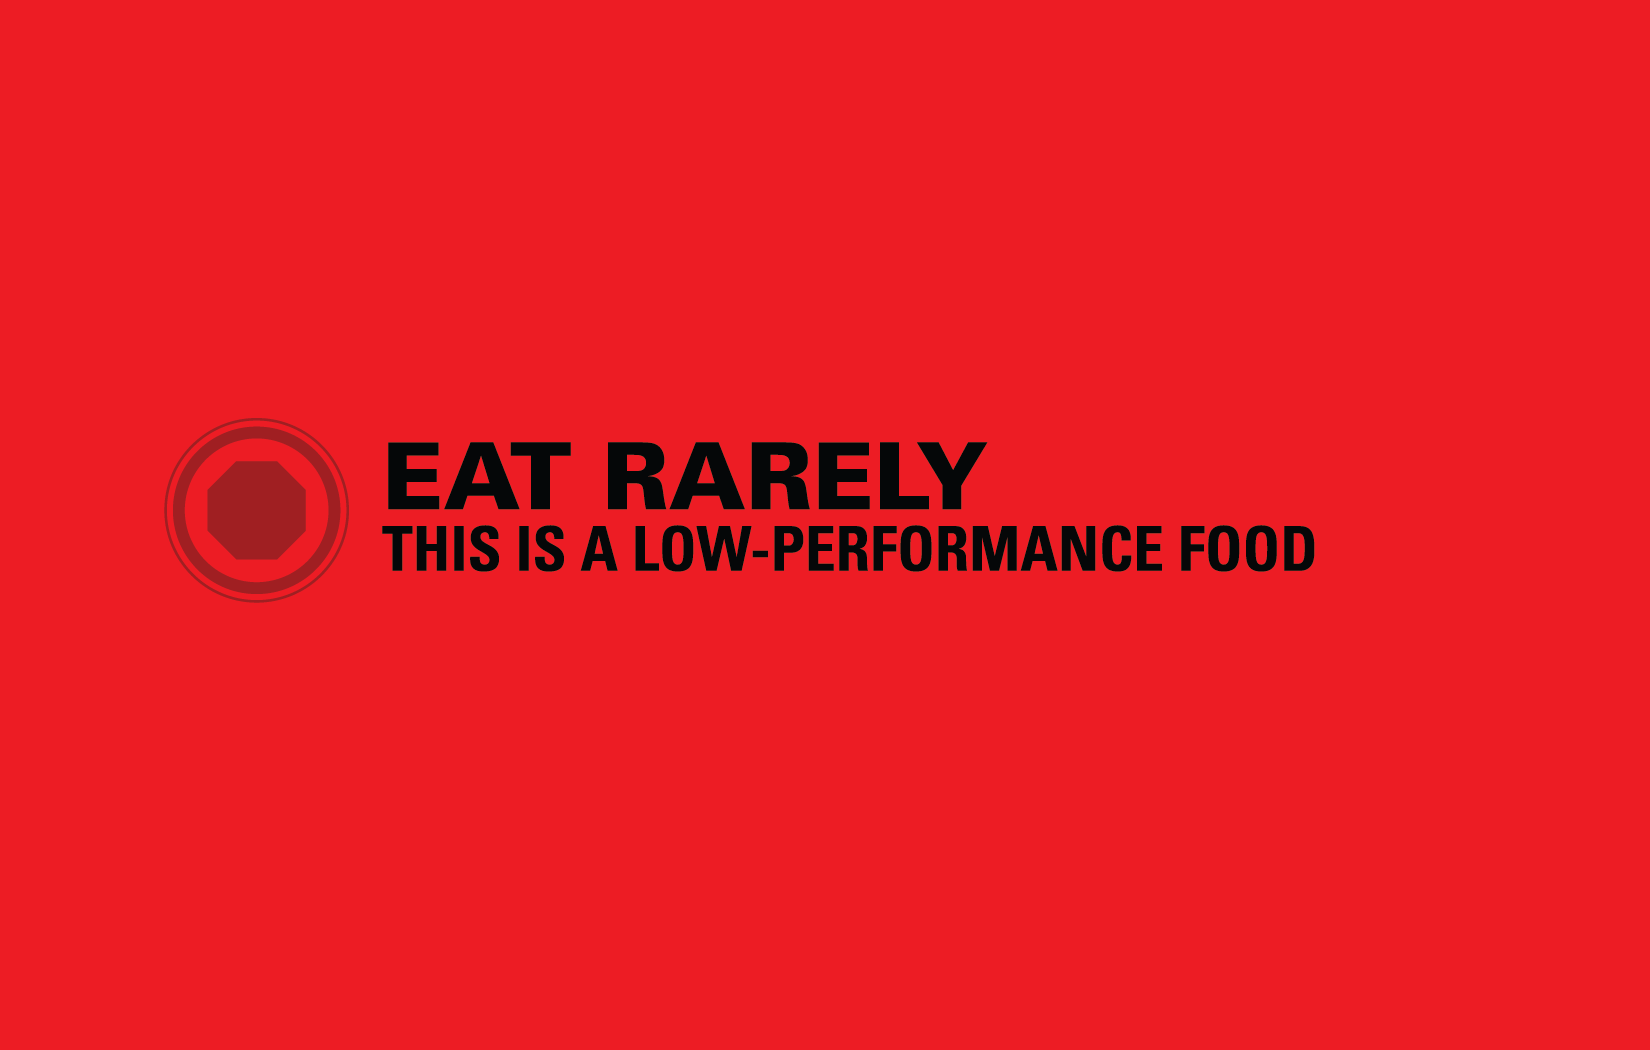 Red “stop” octagon symbol. Eat rarely. This is a low-performance food.